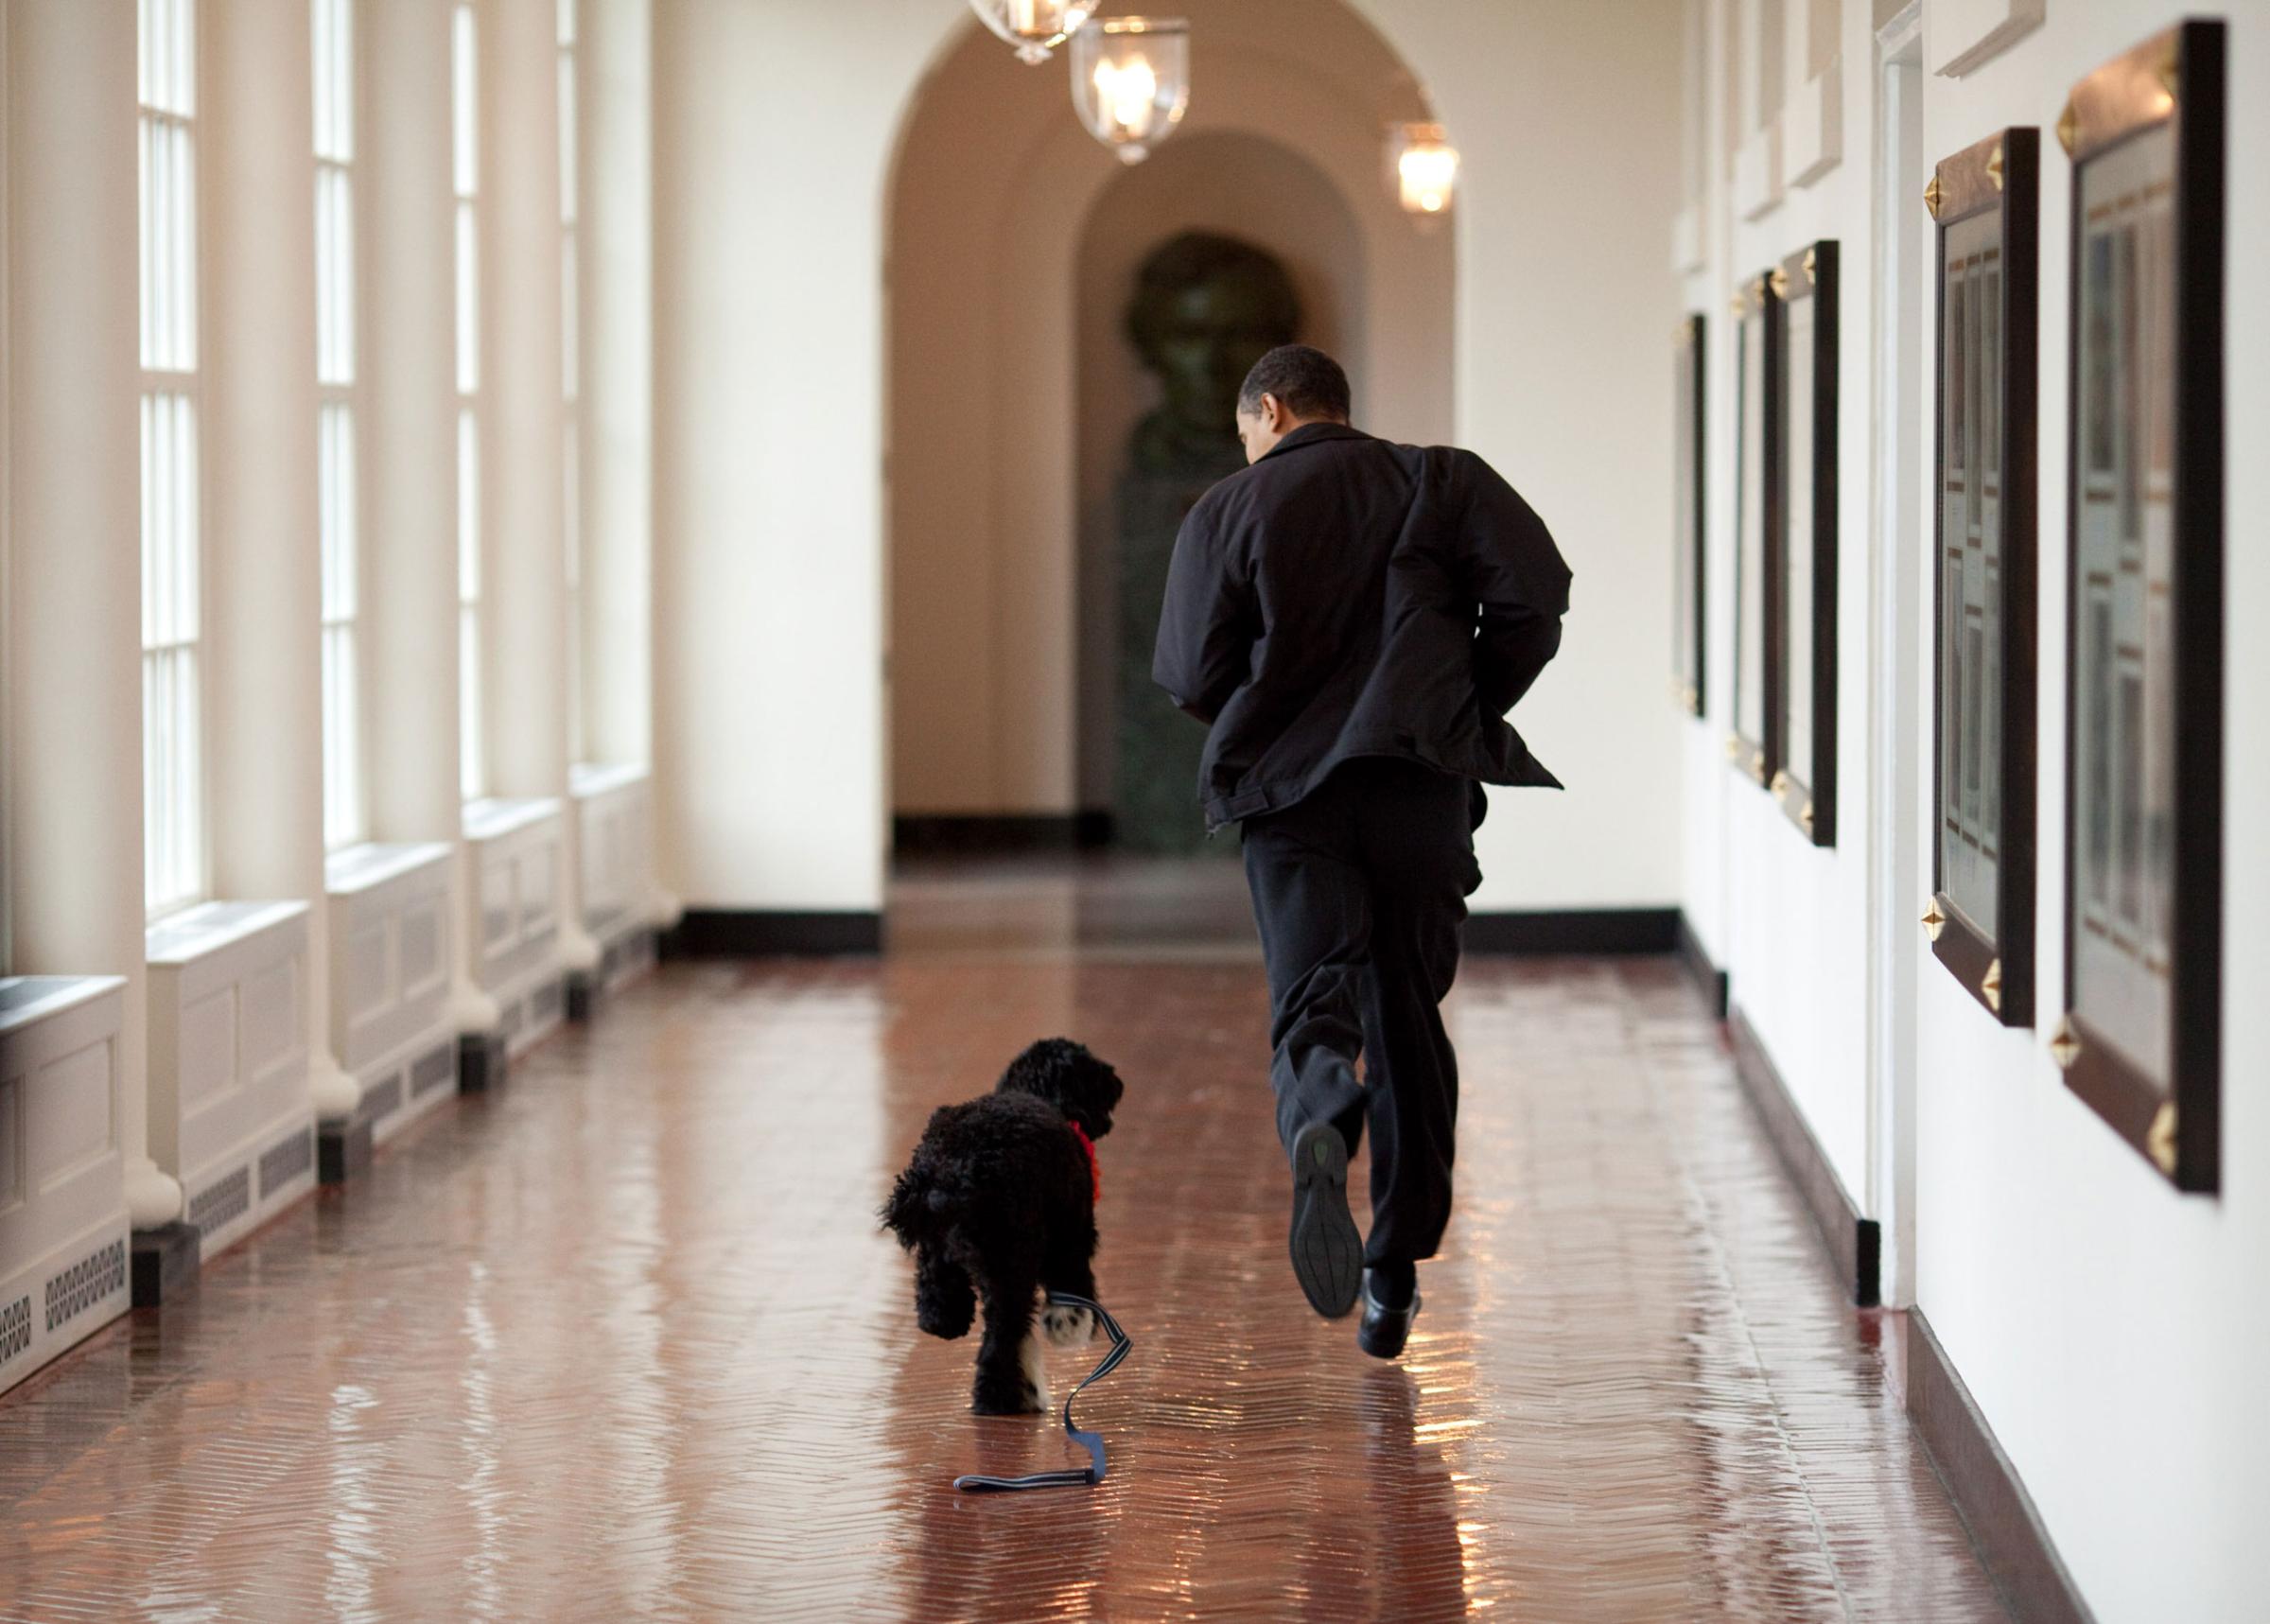 “The Obama family was introduced to a prospective family dog at a secret greet on a Sunday. After spending about an hour with him, the family decided he was the one. Here, the dog ran alongside the President in an East Wing hallway. The dog returned to his trainer while the Obama’s embarked on their first international trip. I had to keep these photos secret until a few weeks later, when the dog was brought ‘home’ to the White House and introduced to the world as Bo.” March 15, 2009